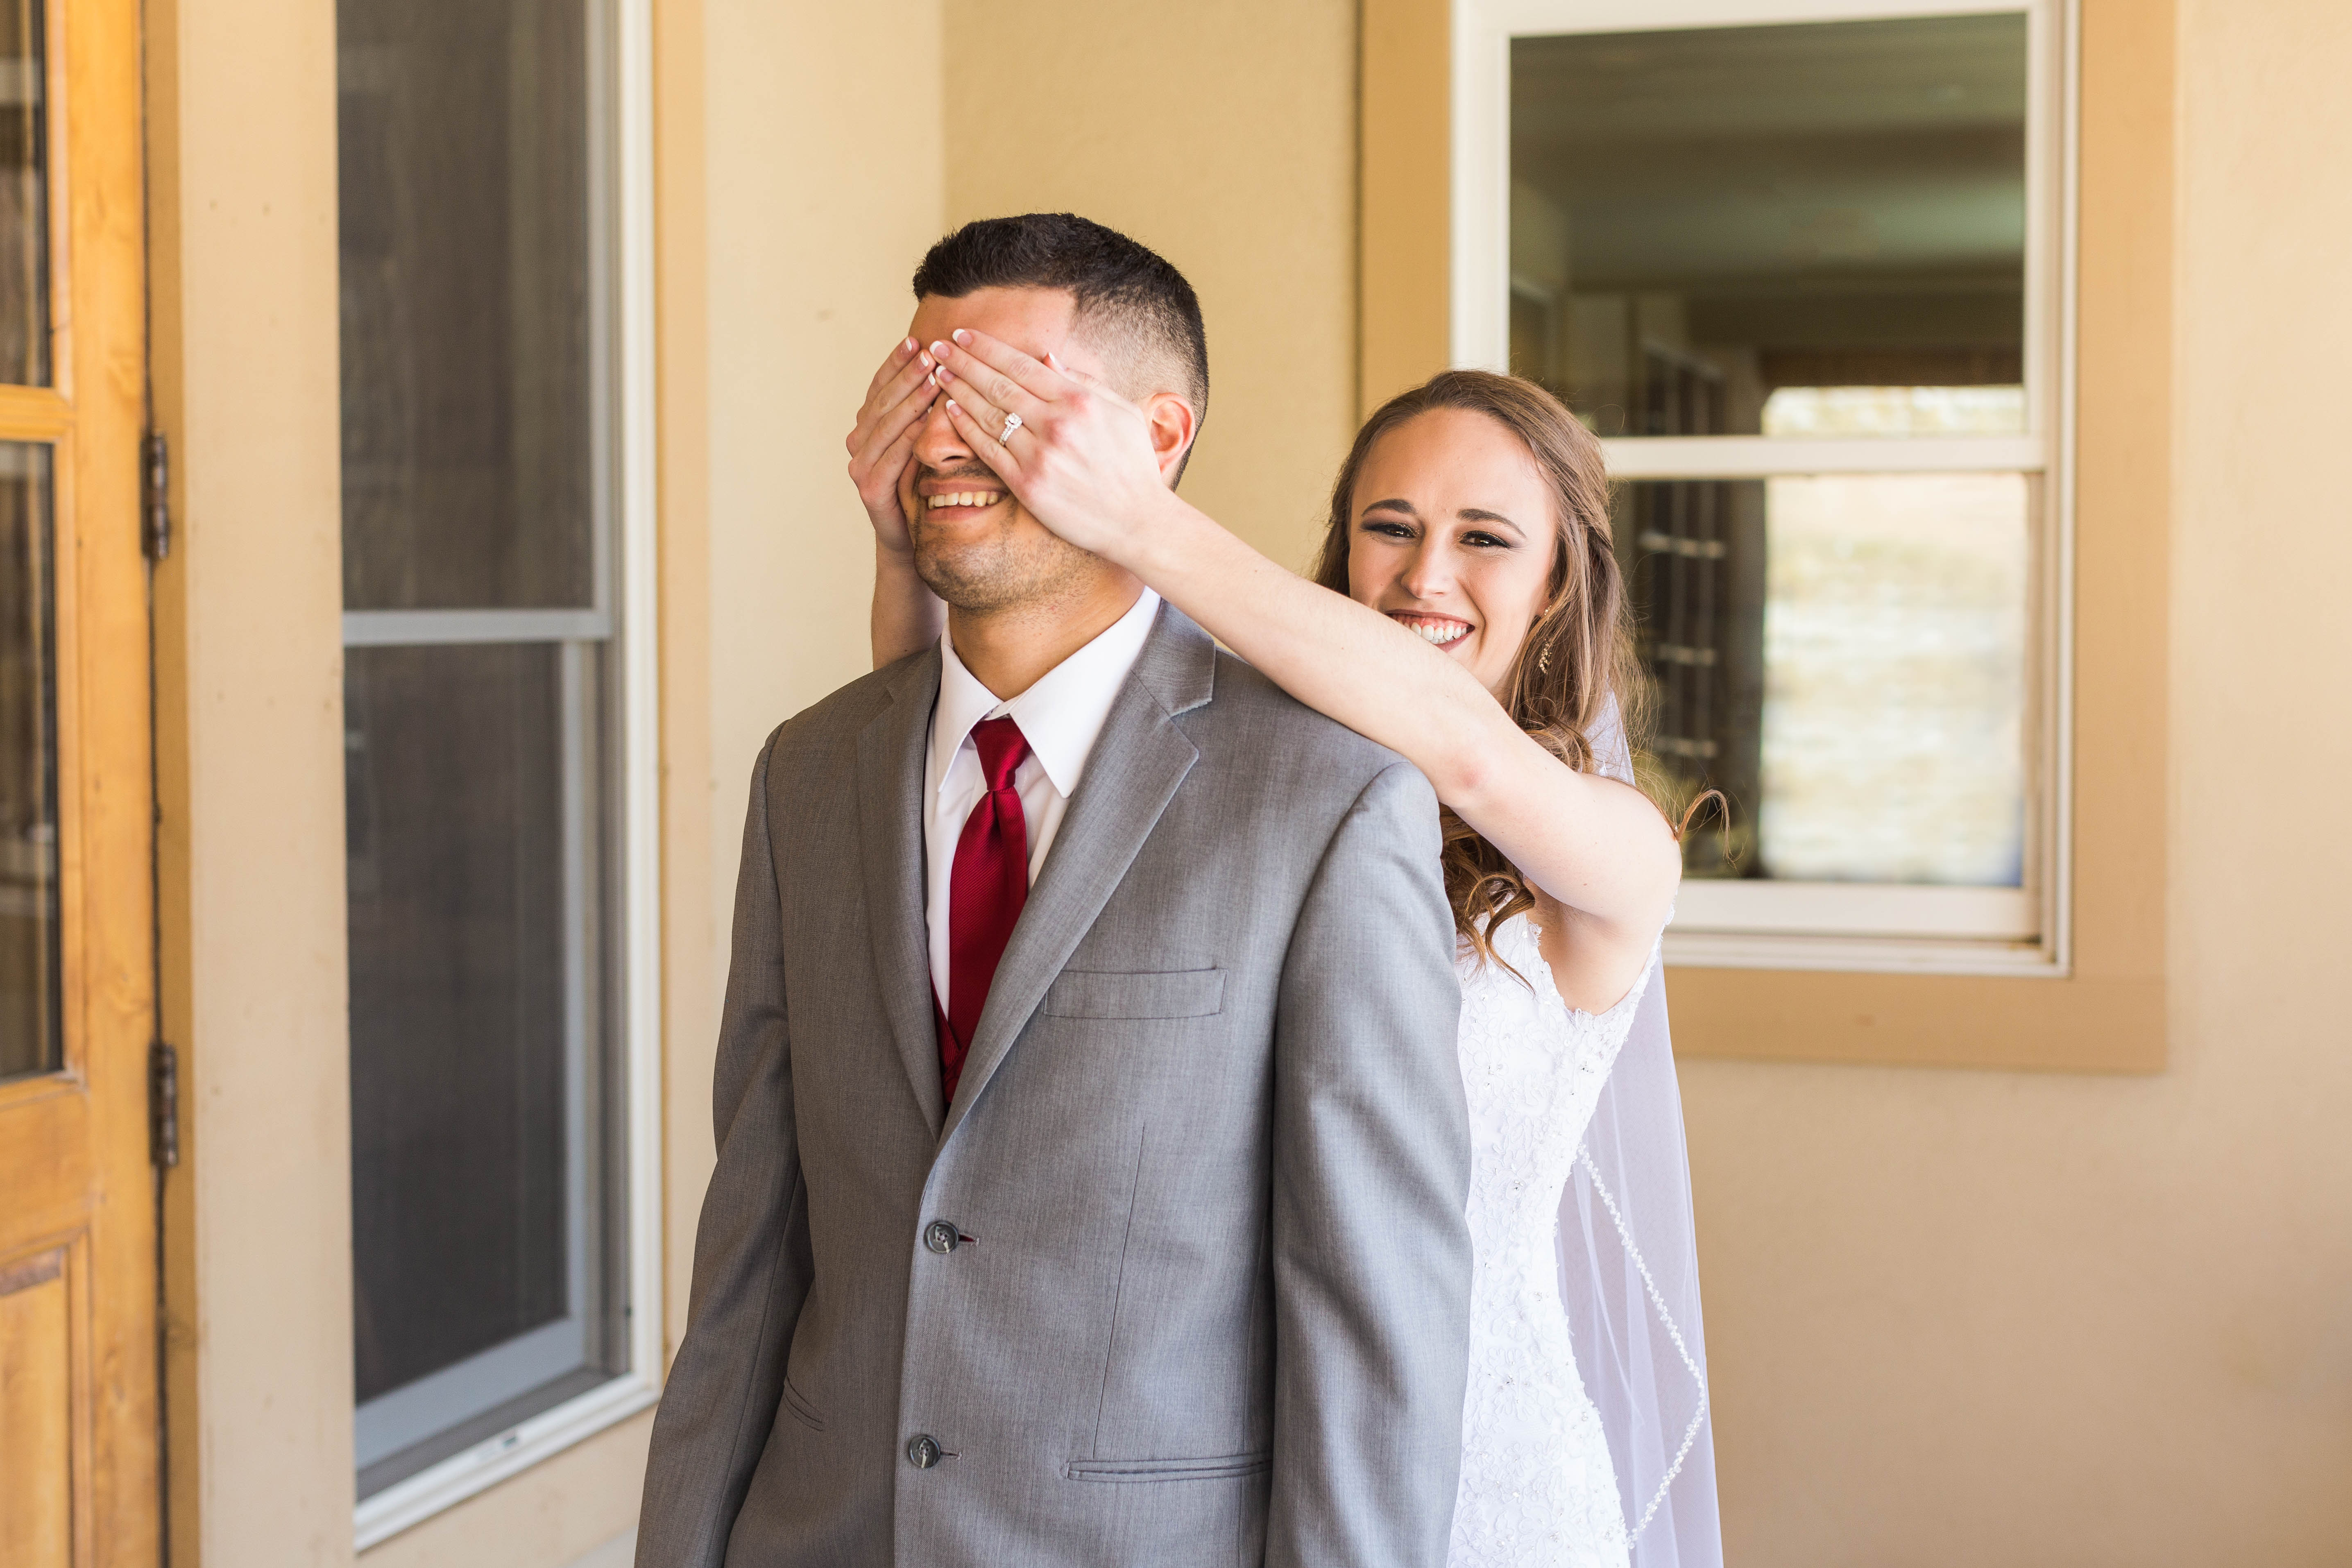 Bride giggles as she covers groom's eyes during first look